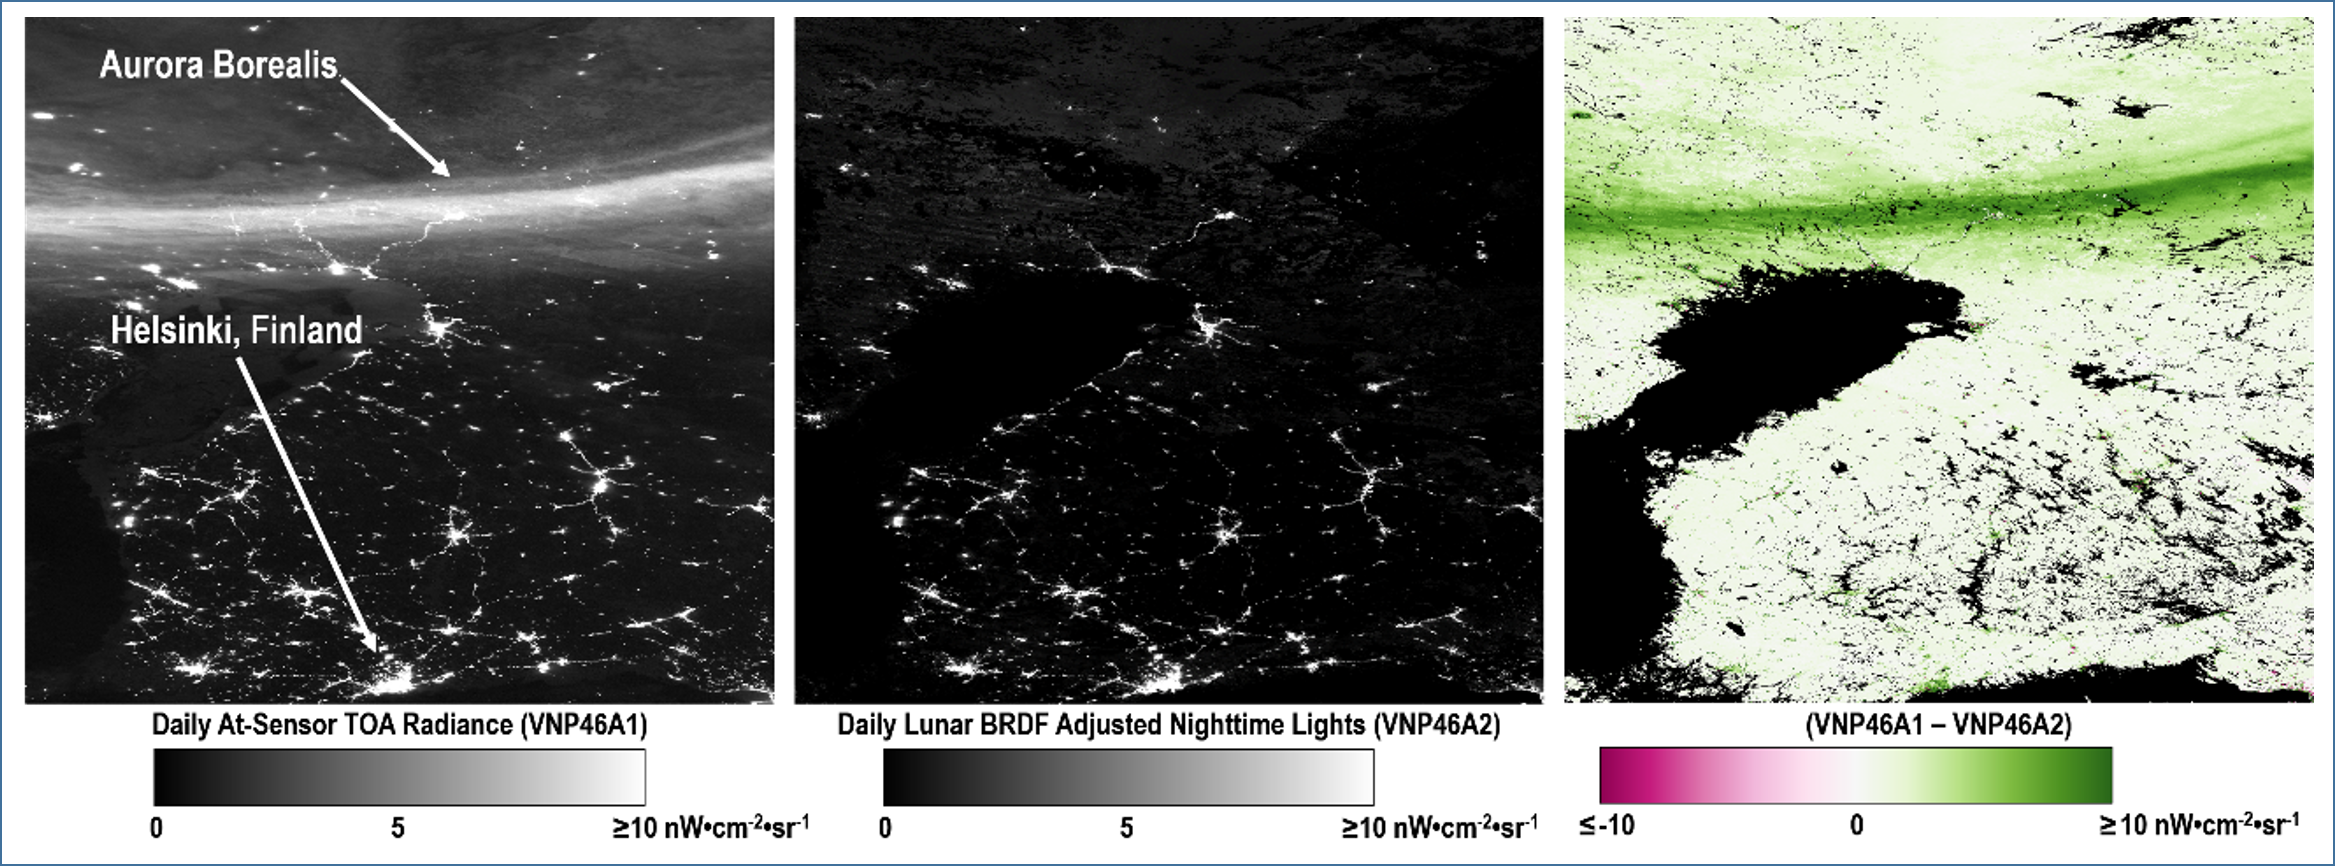 VNP46 product suite components for a 10° x 10° Level 3 tile over Sweden and Finland (h20v02; DOY 2013-080). The half-moon-illuminated and 30% cloud-contaminated scene is shown to capture extraneous light emissions north of the Gulf of Bothnia caused by the Aurora Borealis.